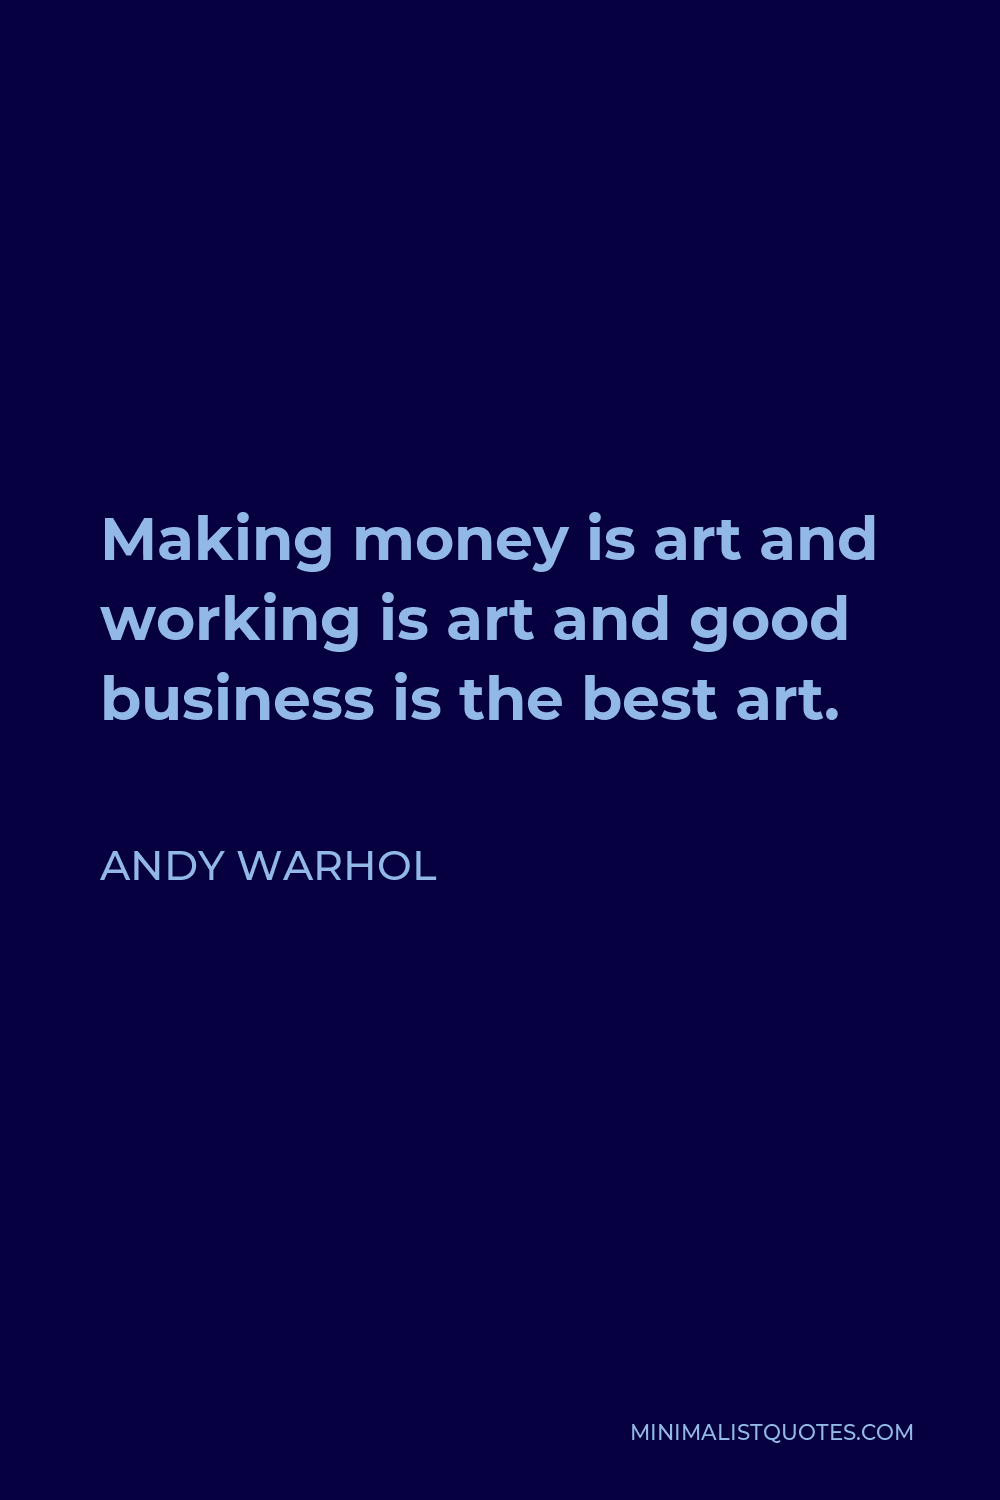 Andy Warhol Quote - Making money is art and working is art and good business is the best art.